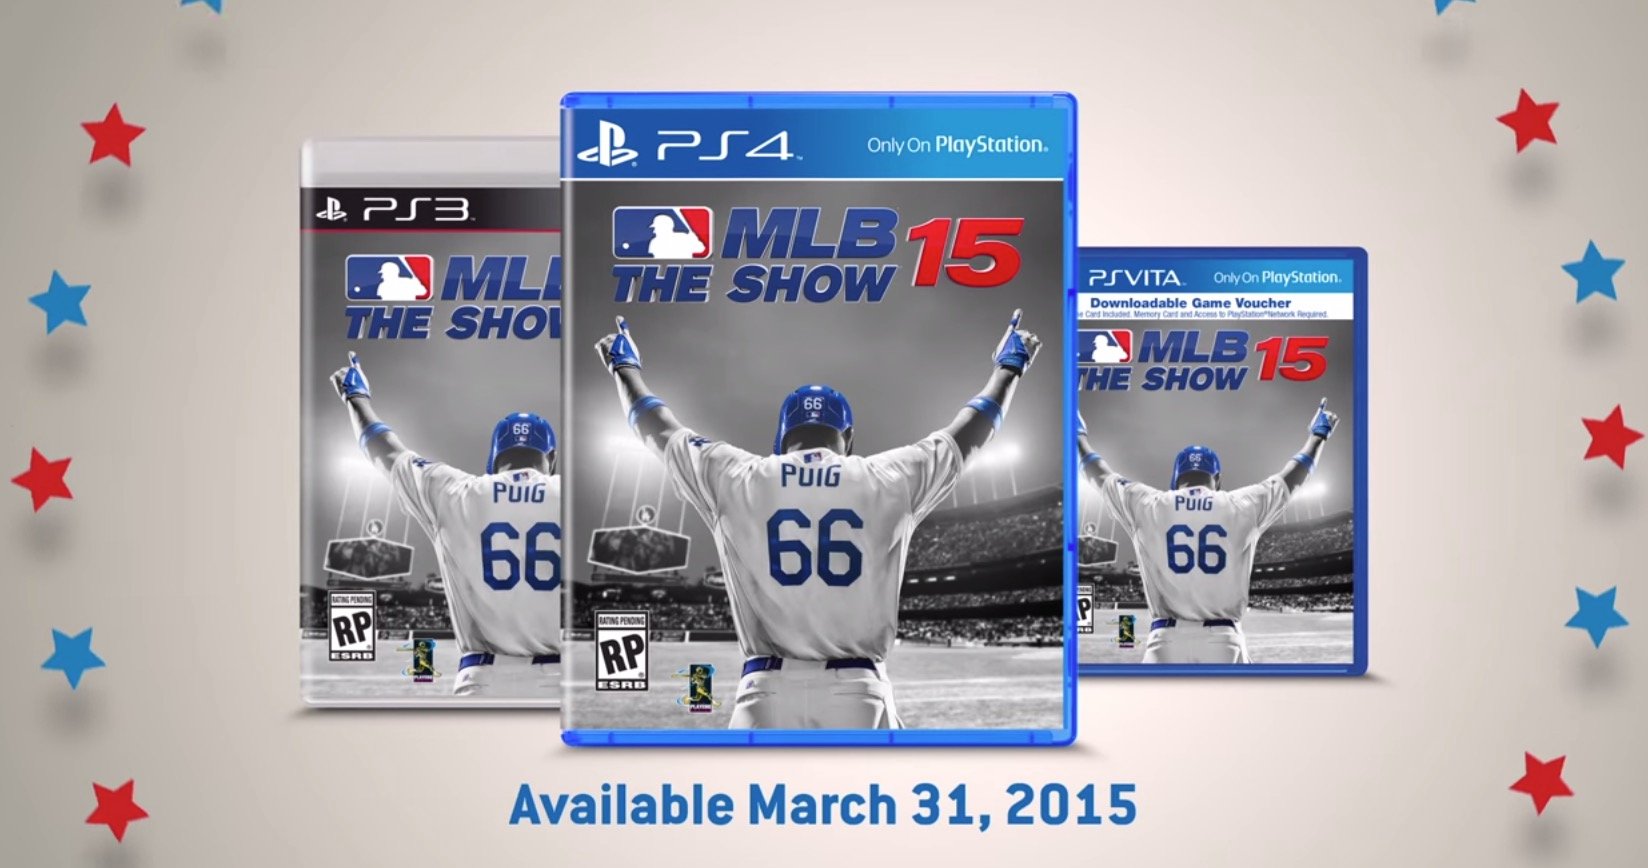 The MLB 15 The Show release date is confirmed, but there's more you need to know.